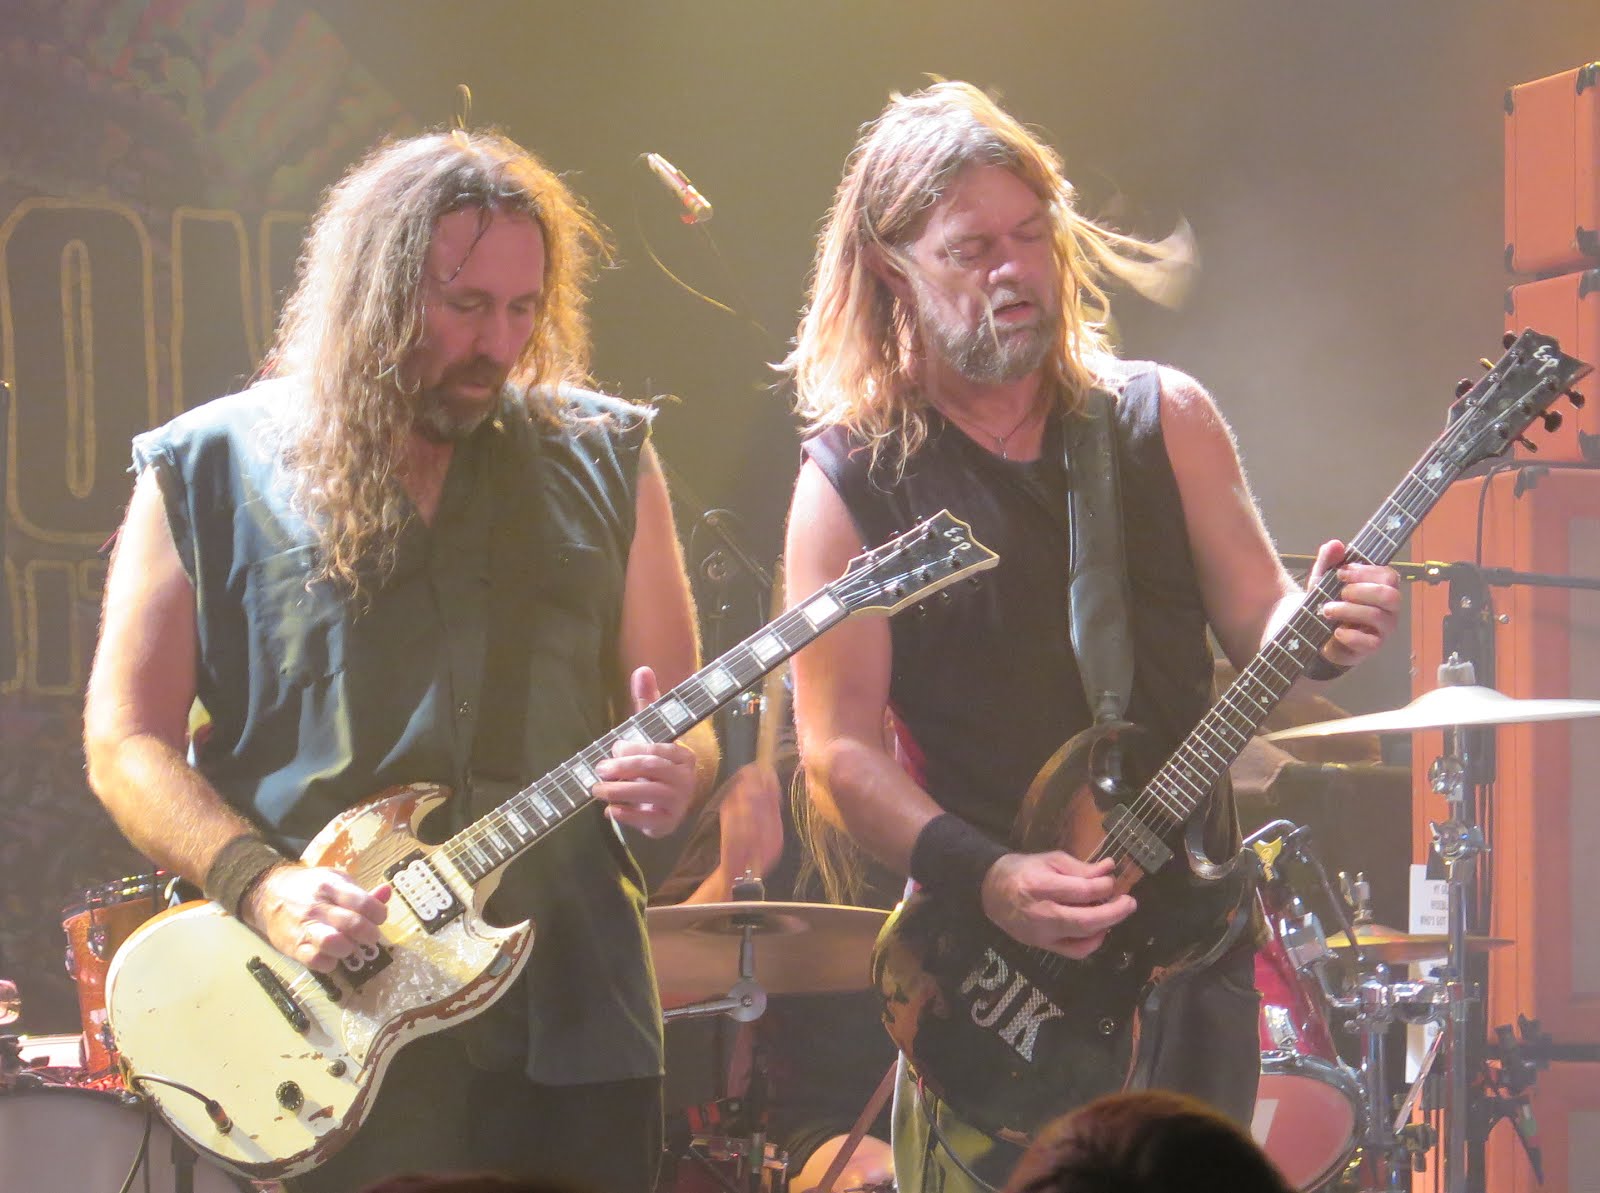 Glacially Musical: Concert Photos: Corrosion of Conformity at Pop's in Sauget IL ...1600 x 1193